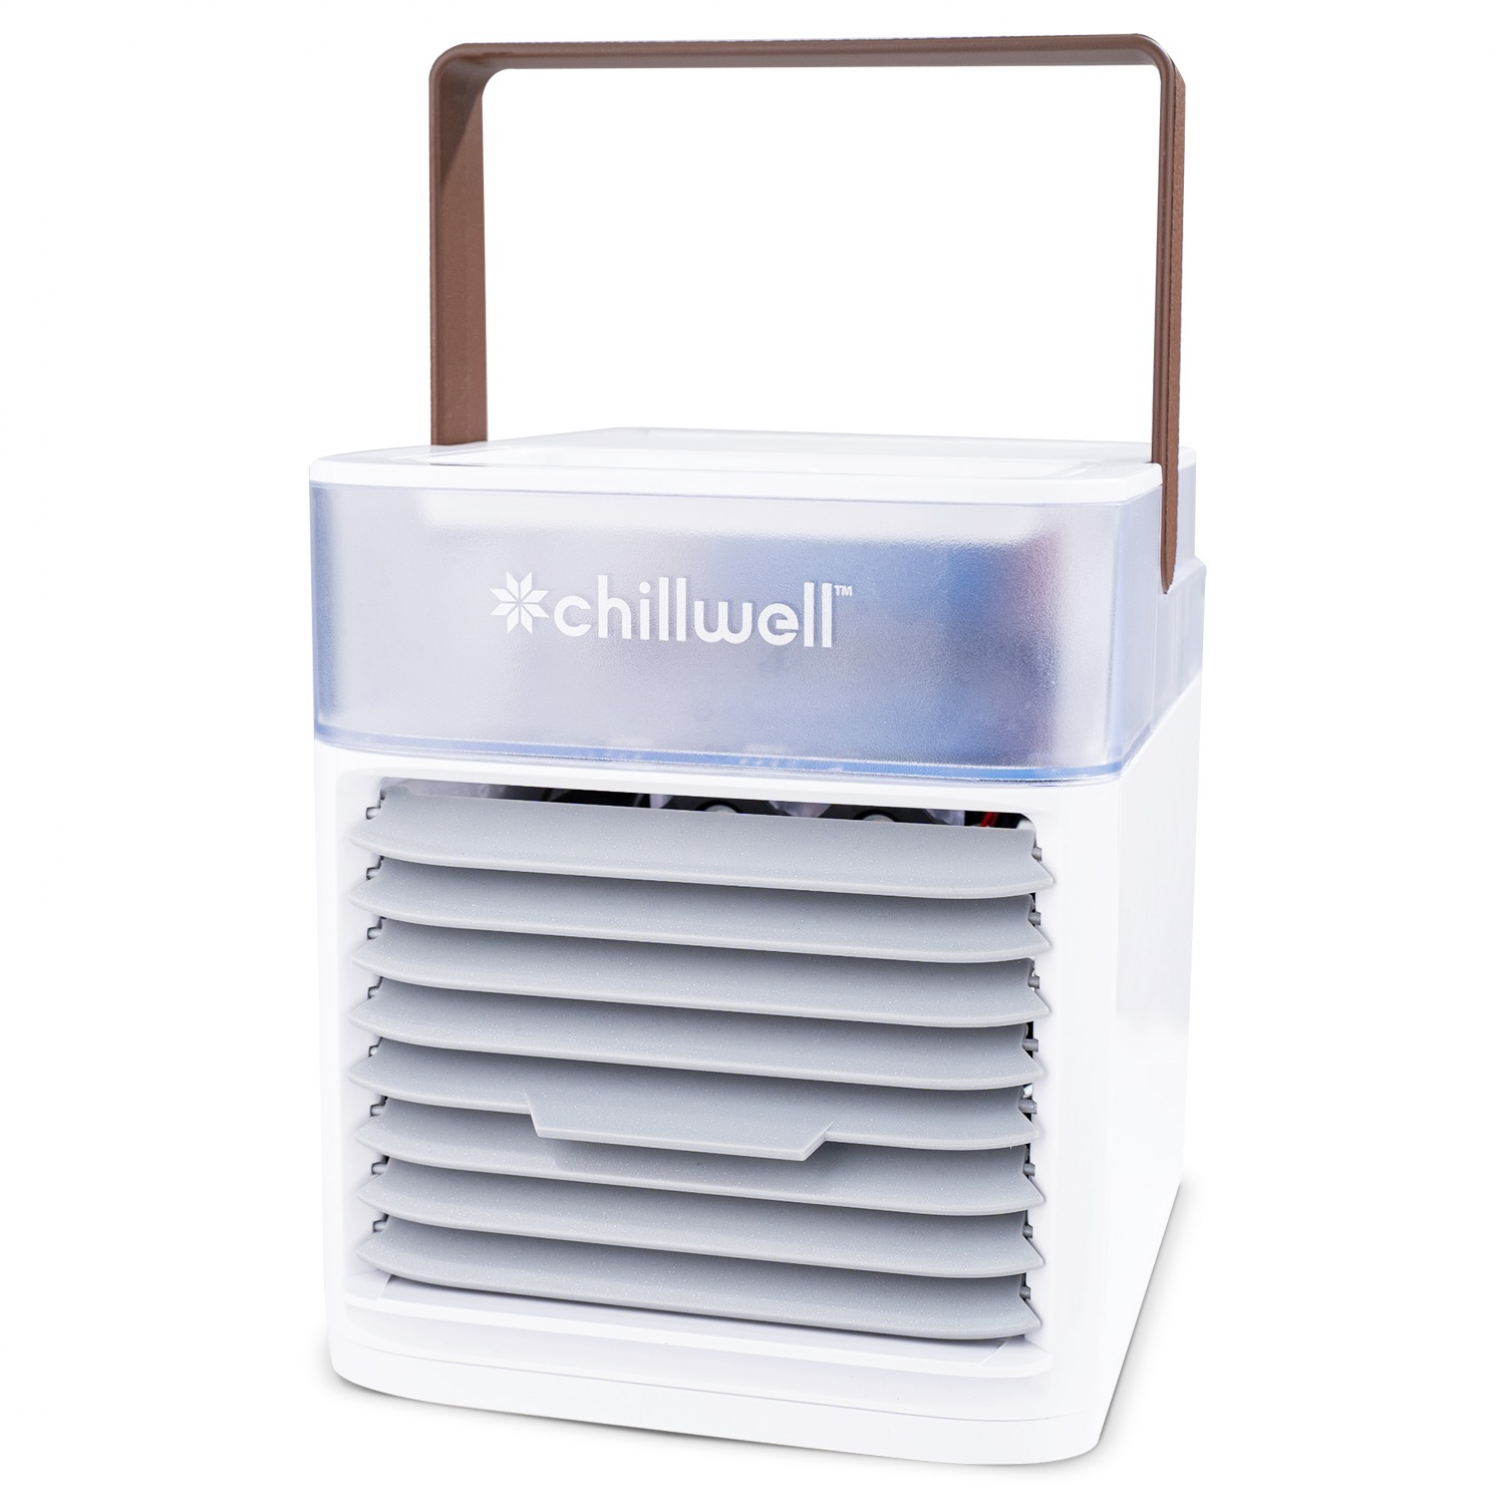 Chillwell AC User Review